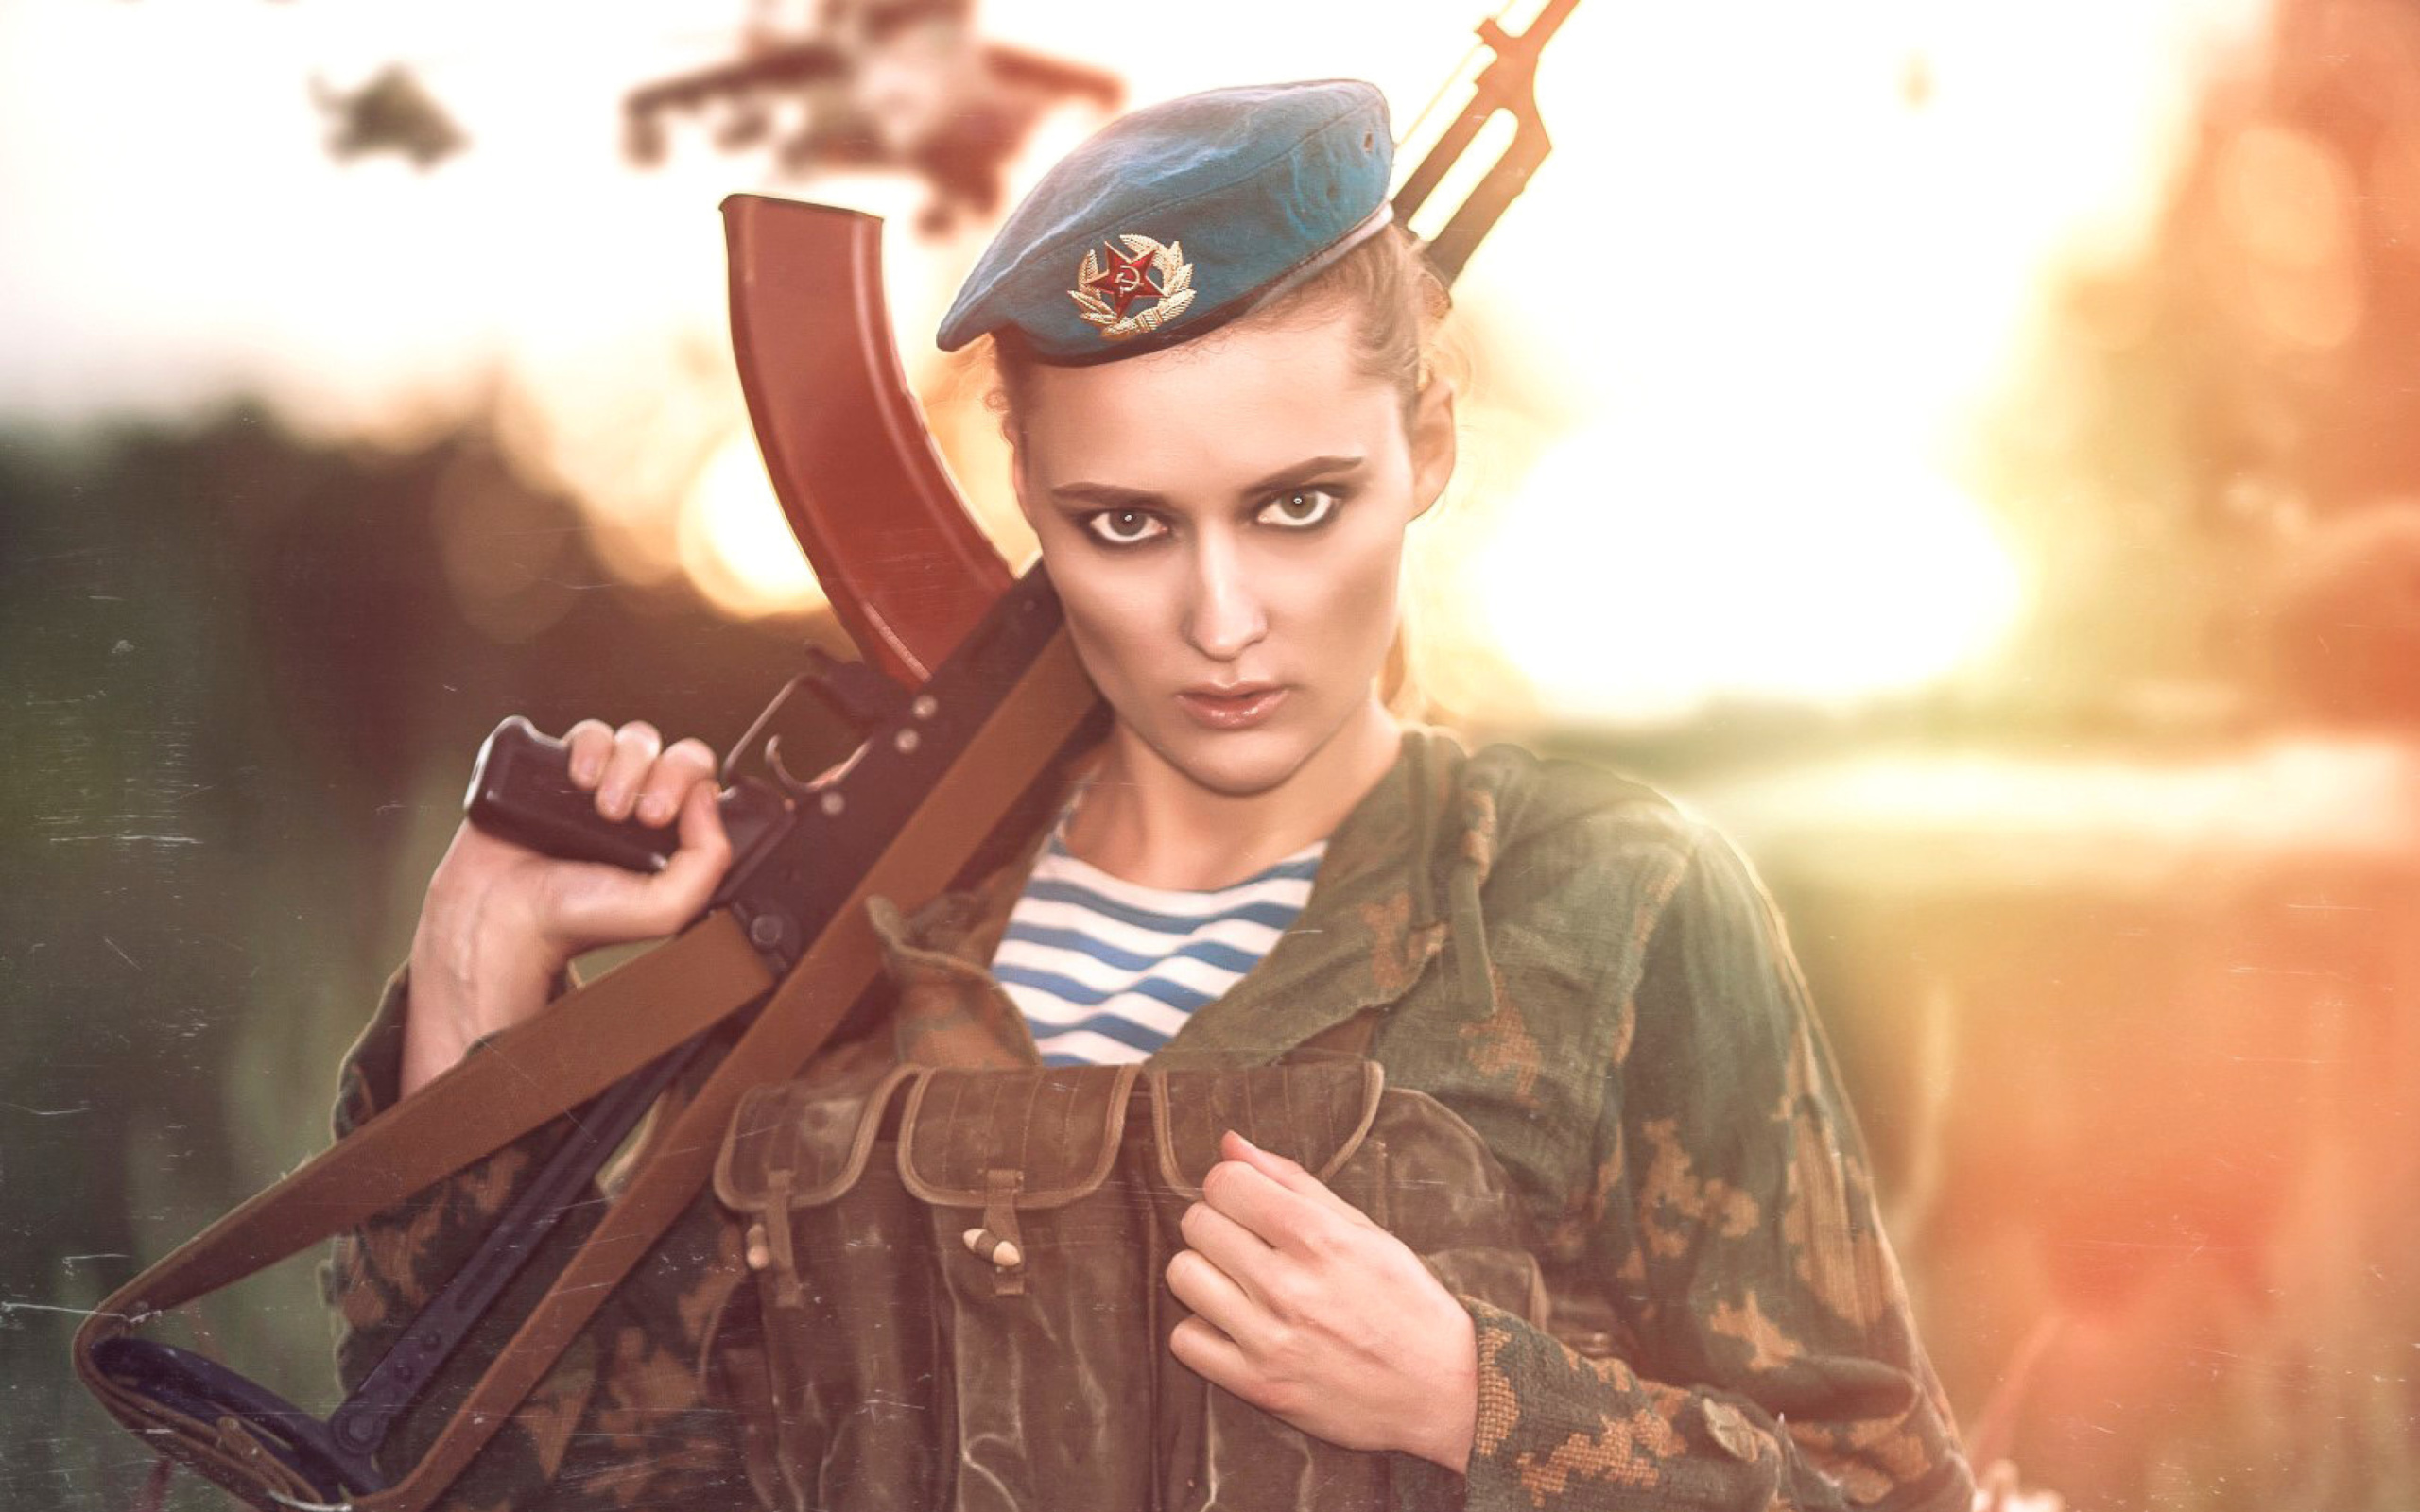 Russian Girl and Weapon HD wallpaper 2560x1600